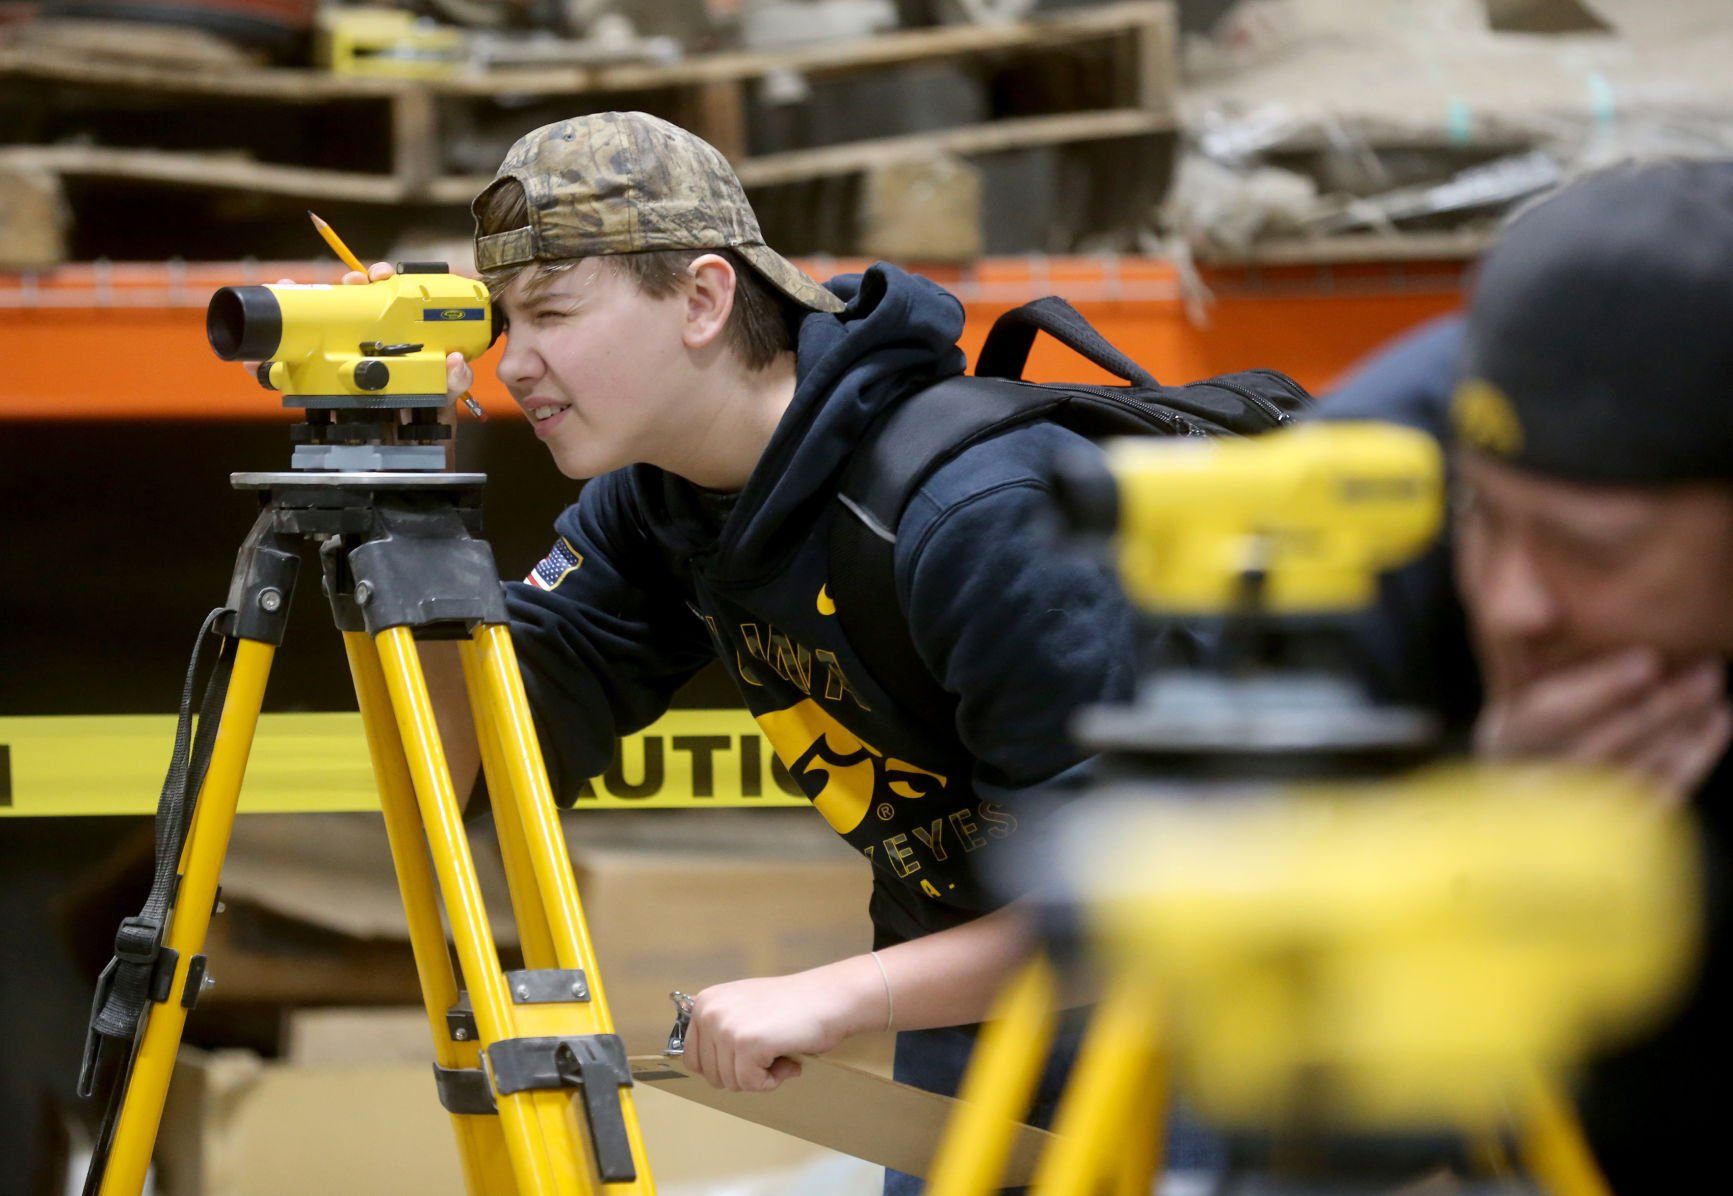 Ryan Gabel, a freshman at Dubuque Senior High School, looks through a builder’s level during the Construction Industry Career Expo at Portzen Construction in Dubuque on Thursday, April 28, 2022.    PHOTO CREDIT: JESSICA REILLY